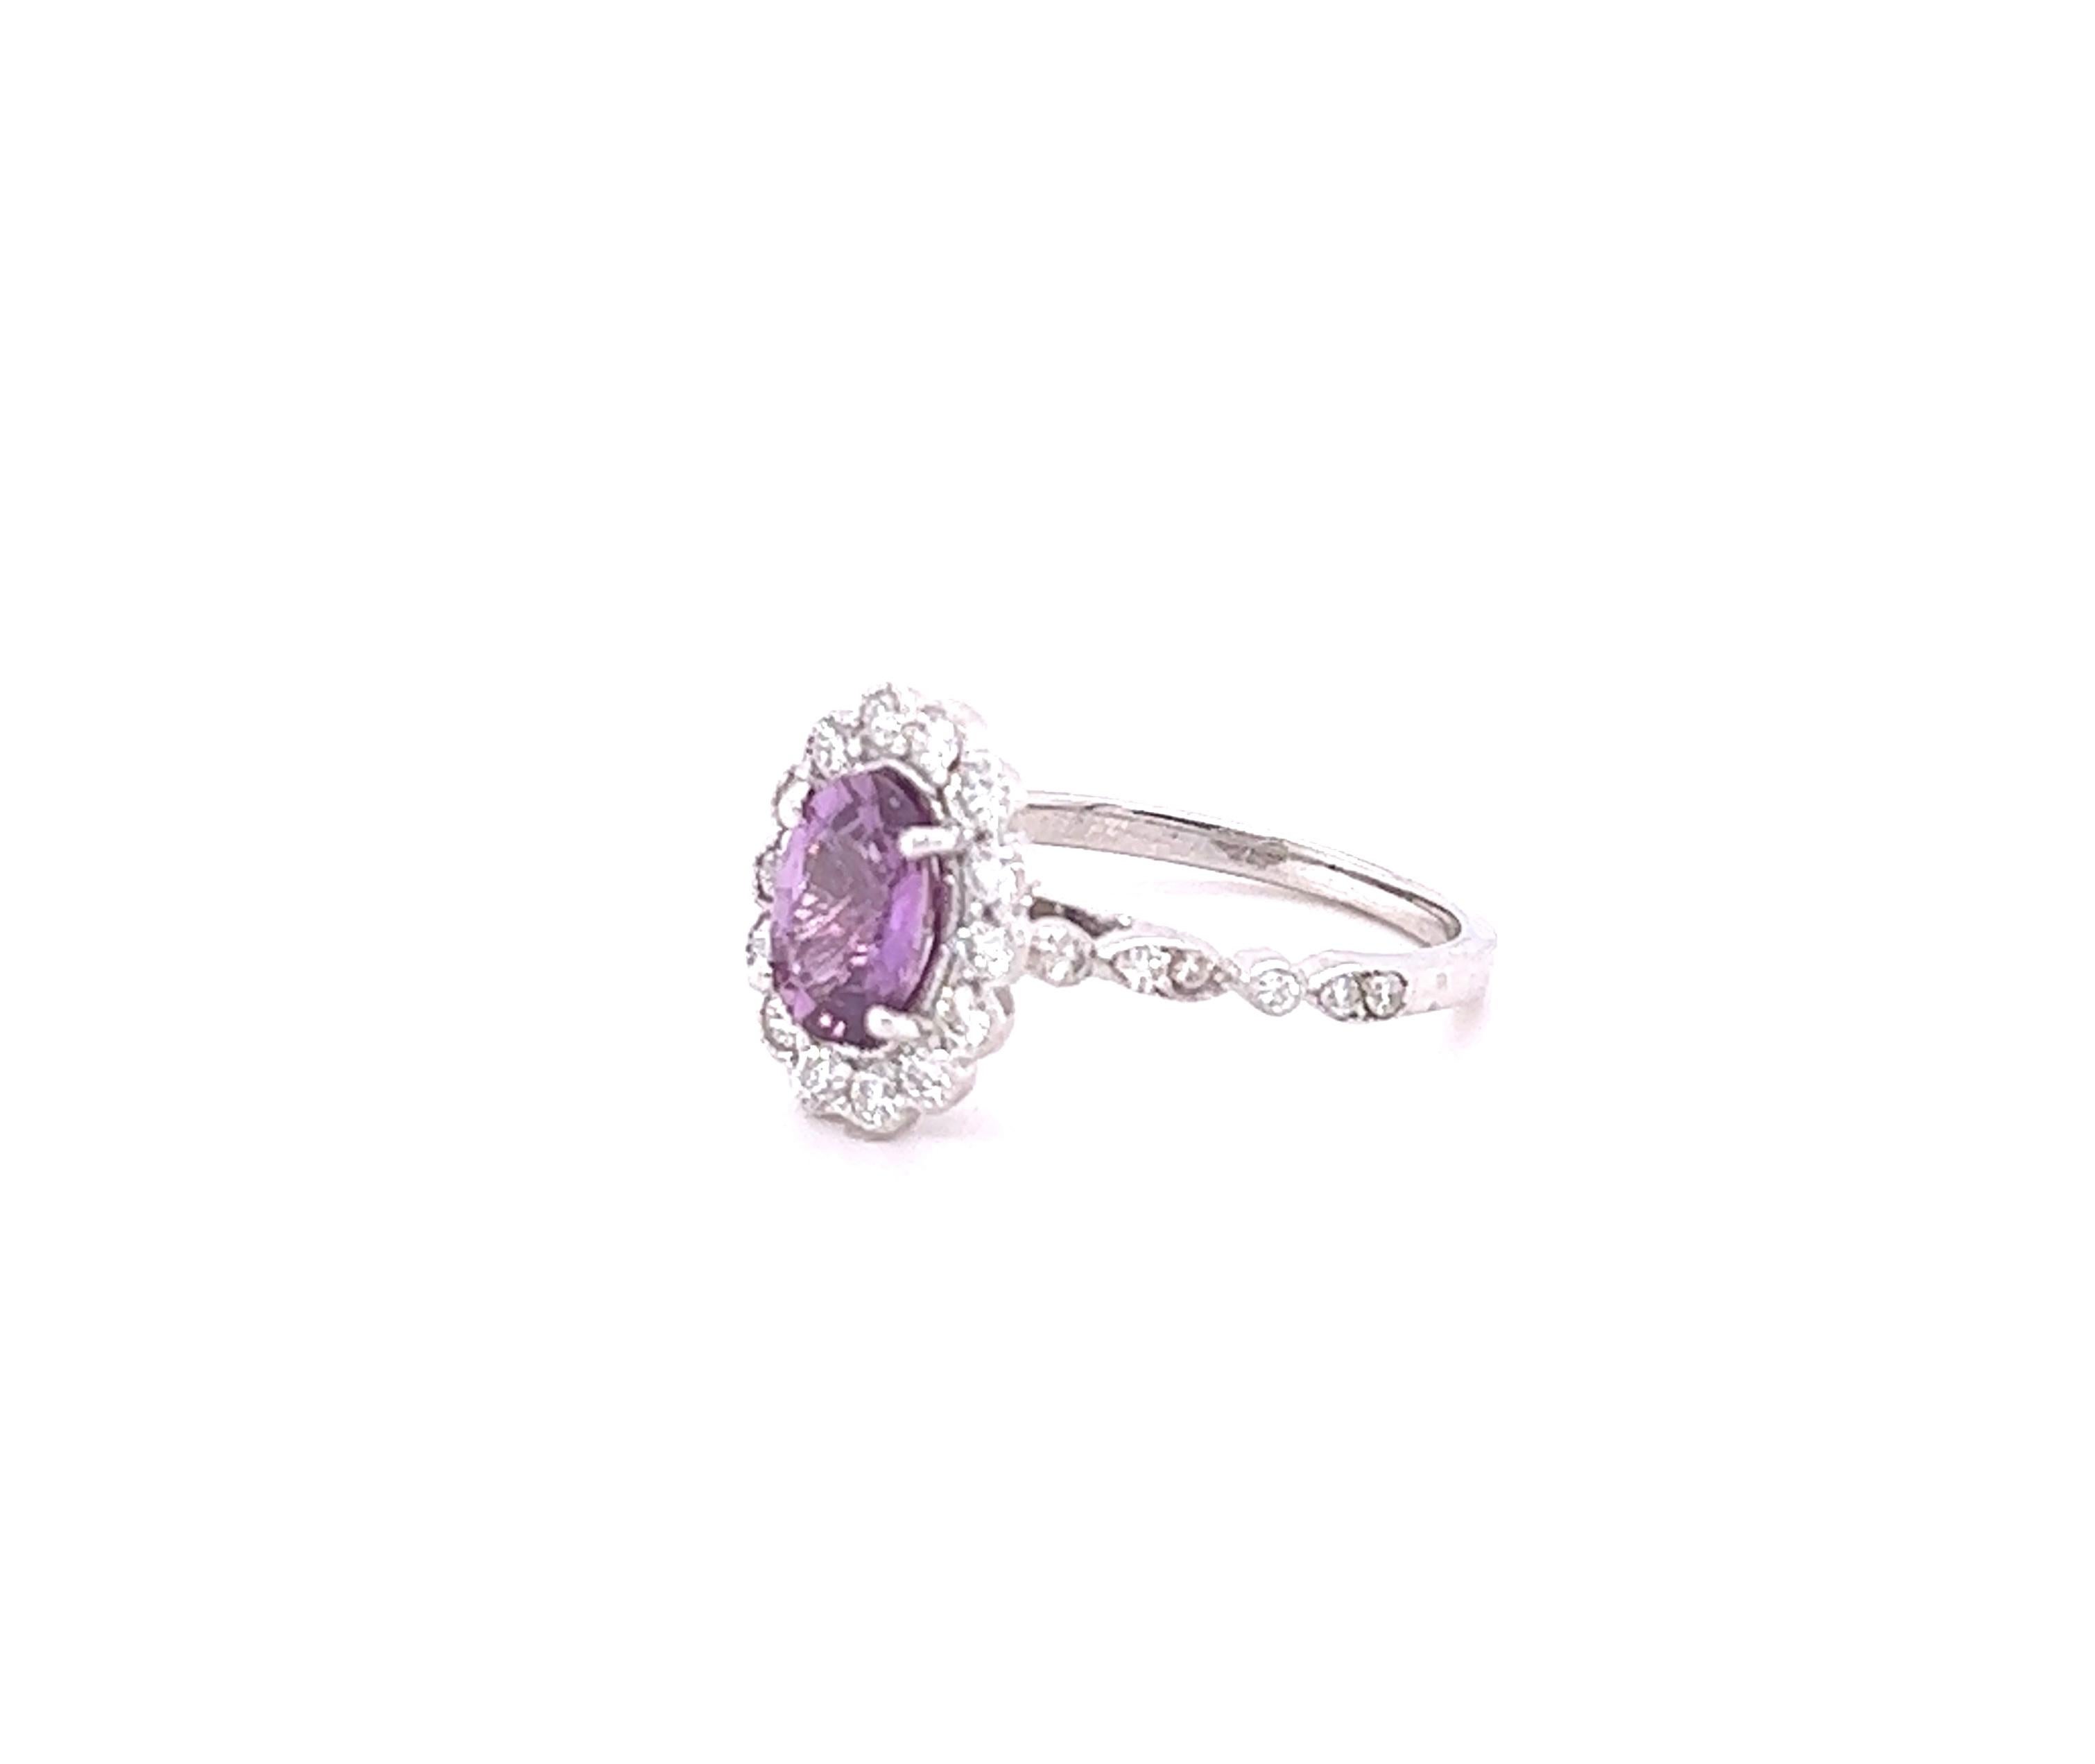 This beautiful ring has a Natural Oval Cut Purplish Pink Sapphire that weights 1.36 Carats. 

The ring is embellished with 26 Round Cut Diamonds that weigh 0.48 Carats with a clarity and color of VS/H. 
The total carat weight of the ring is 1.84